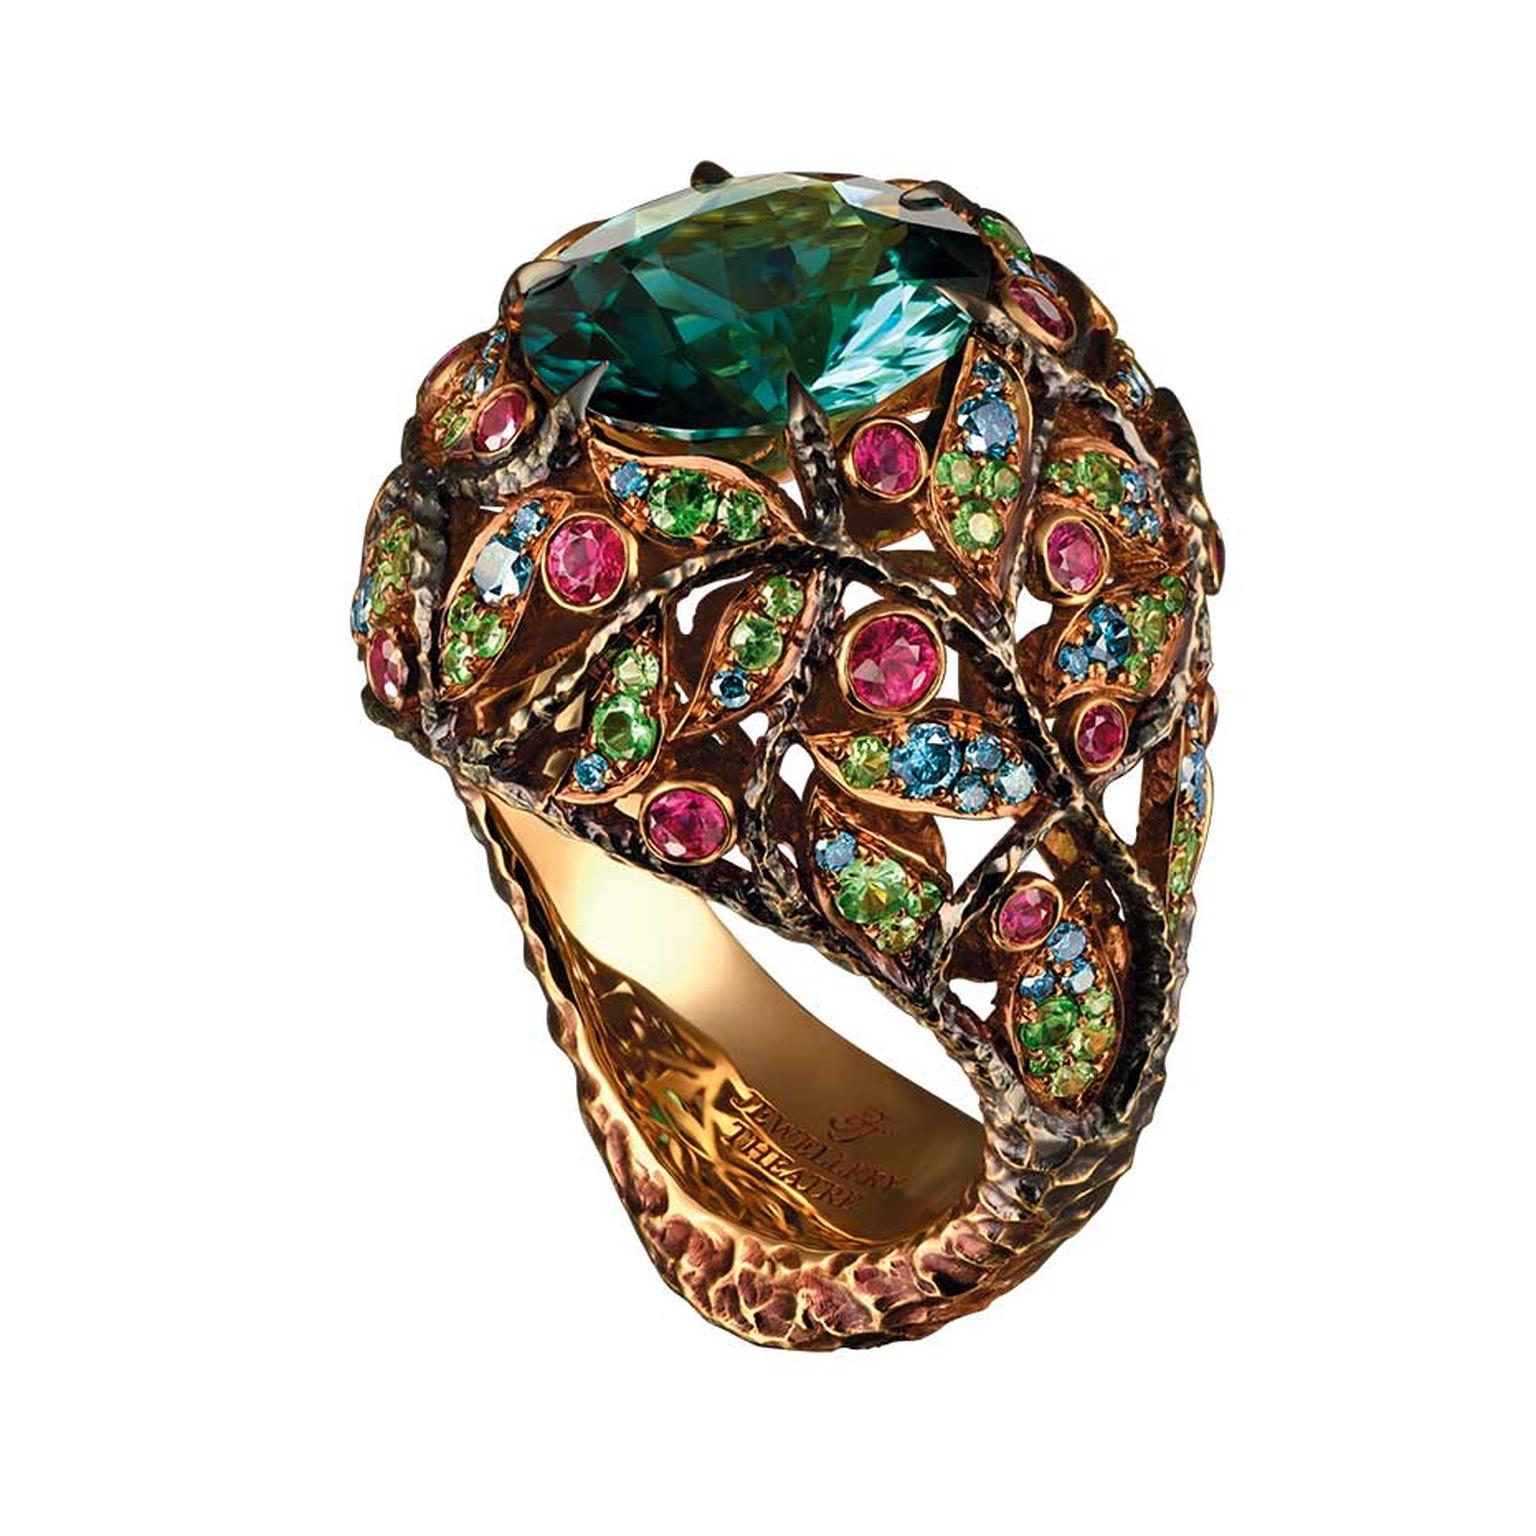 Jewellery Theatre ring in yellow gold from the new Rainforest high jewellery collection, set with a central tourmaline, coloured diamonds, rubies and tsavorites.